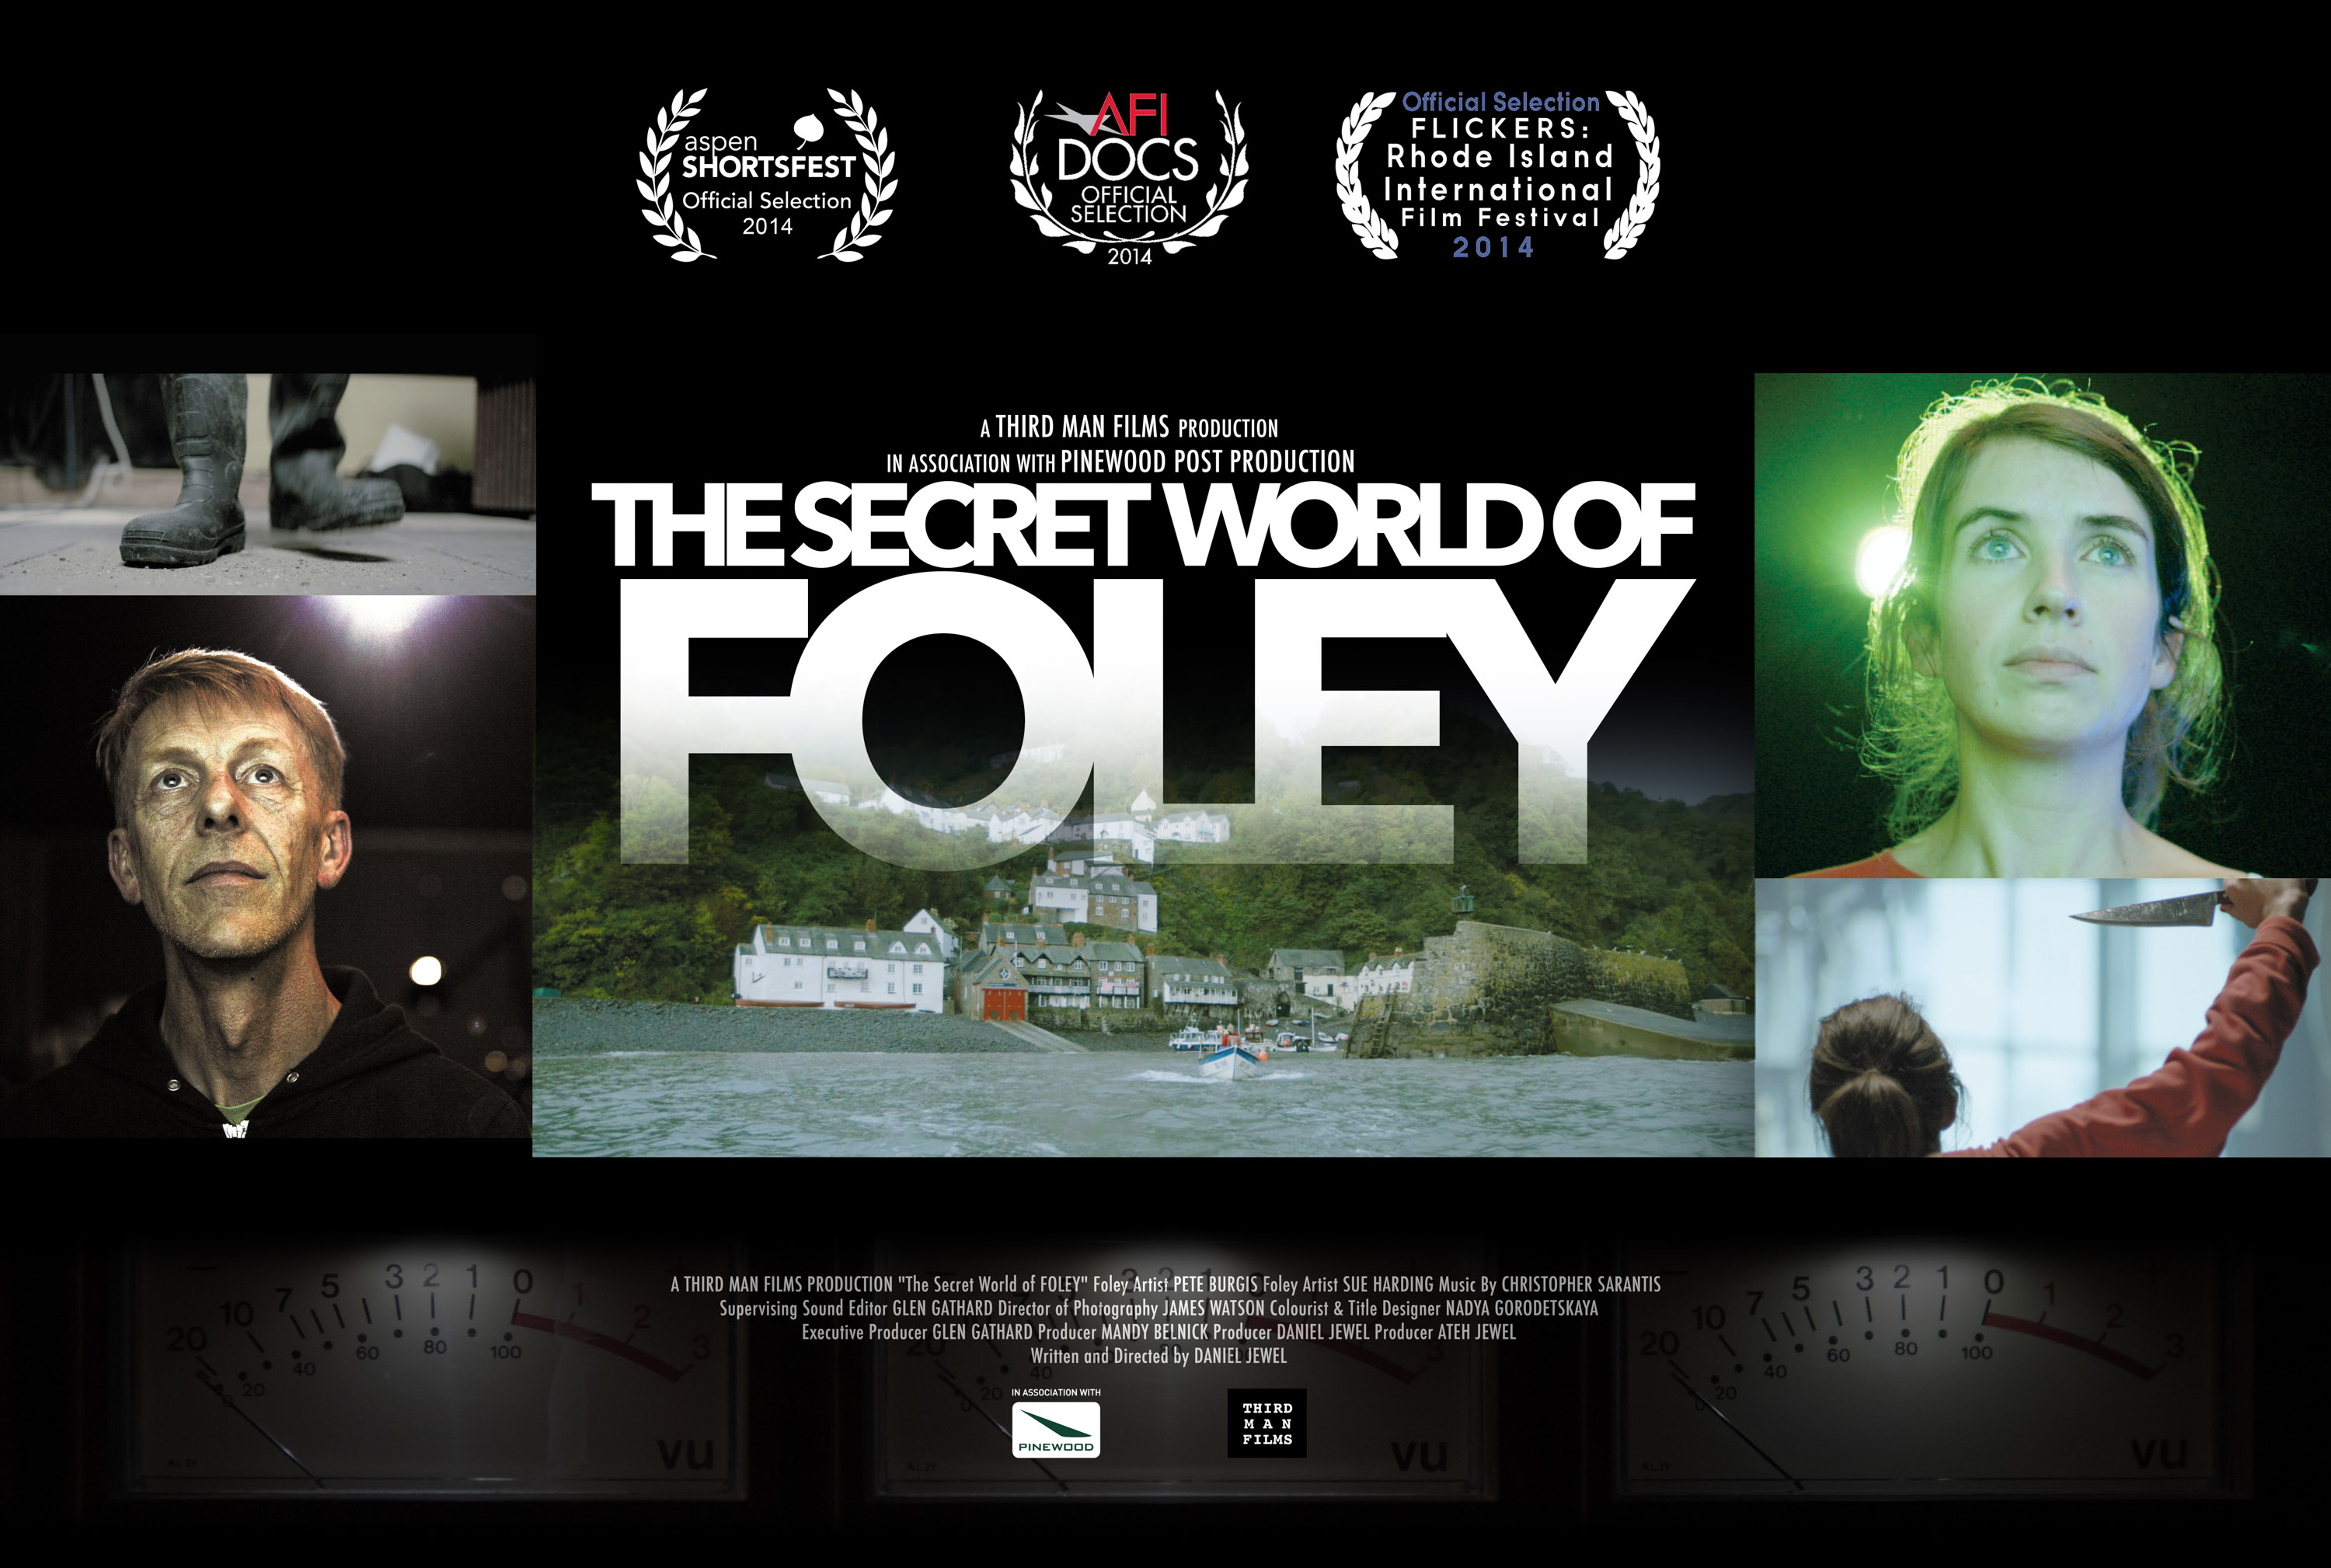 FOLEY_NEW_POSTER_wide_web